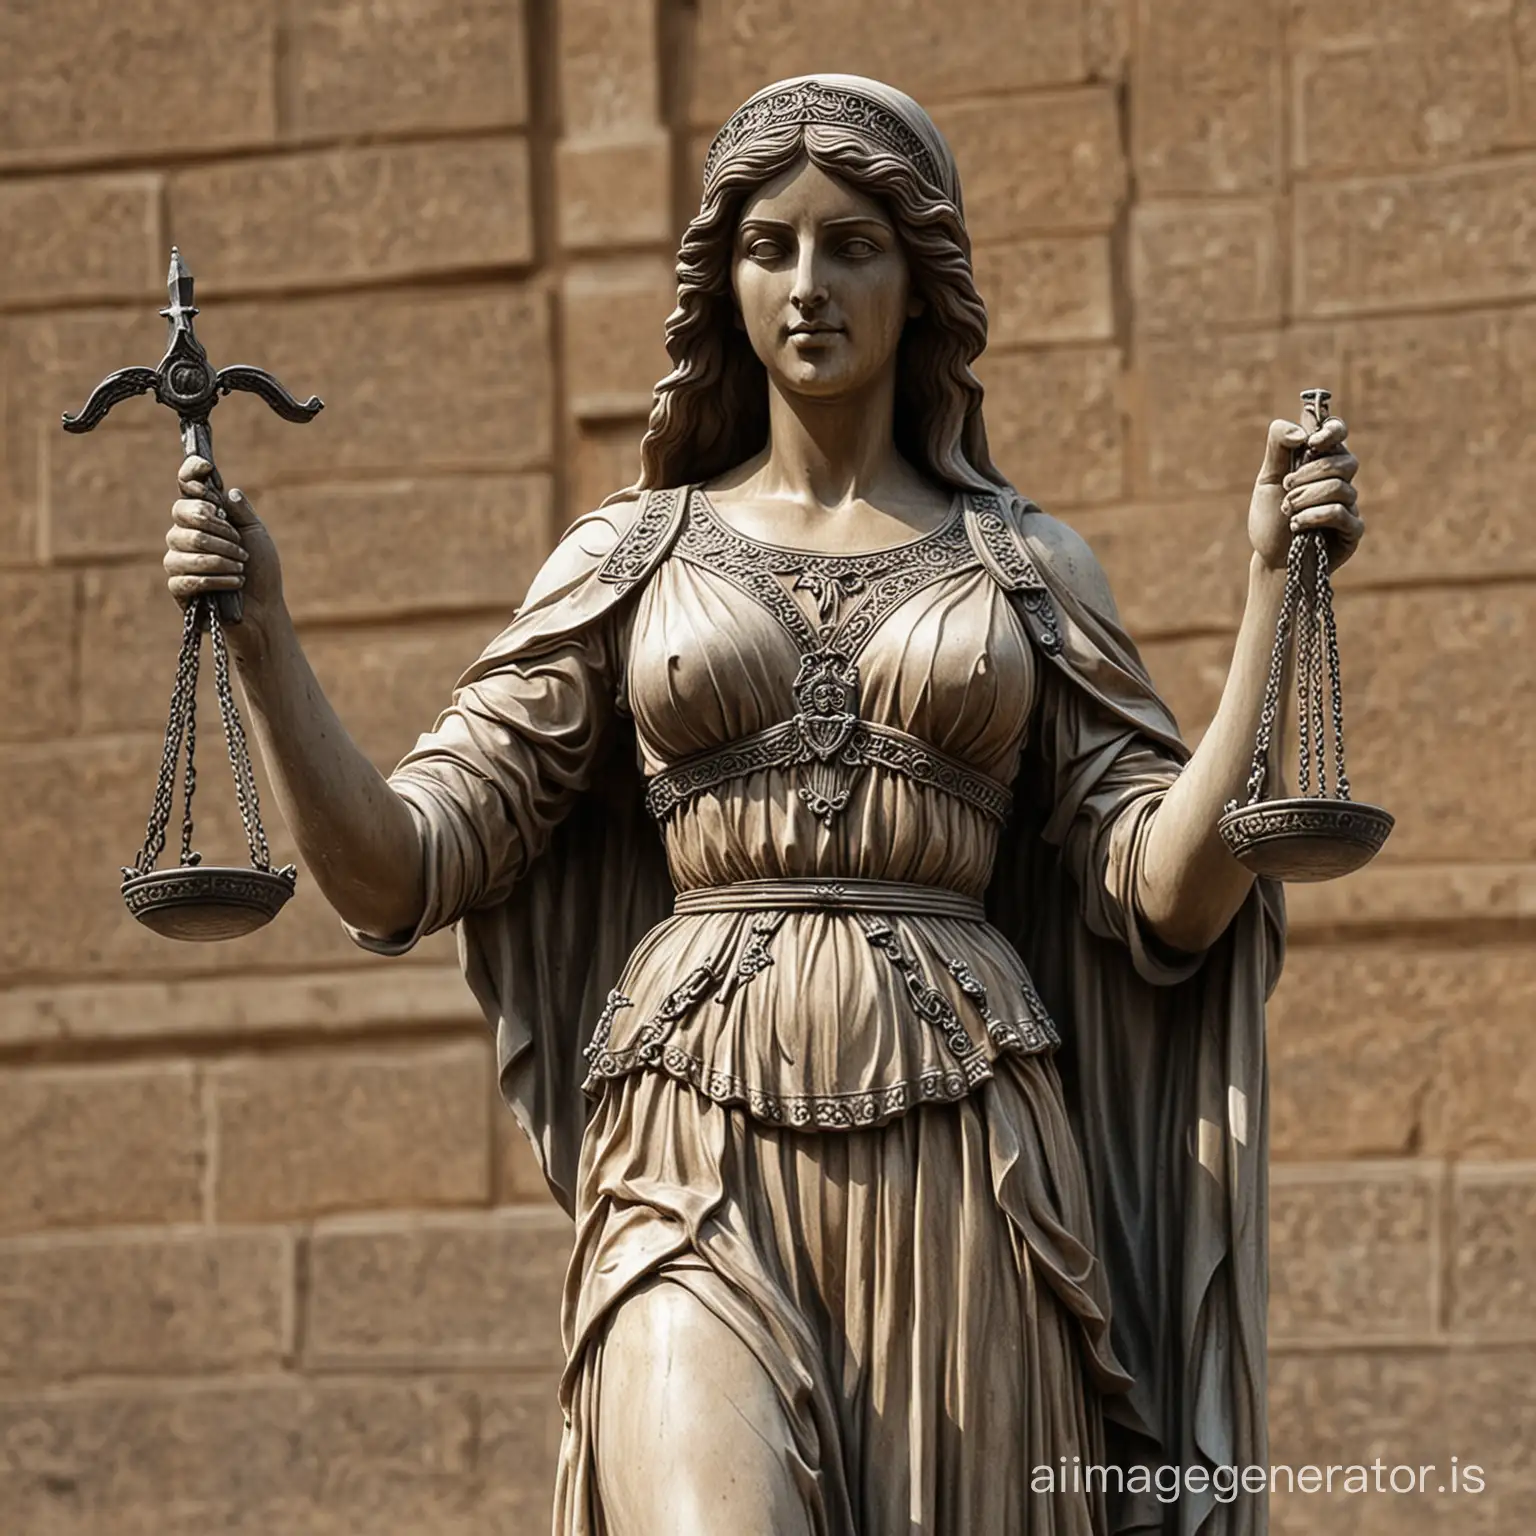 Persian-Statue-of-Justice-Symbolizing-Law-and-Order